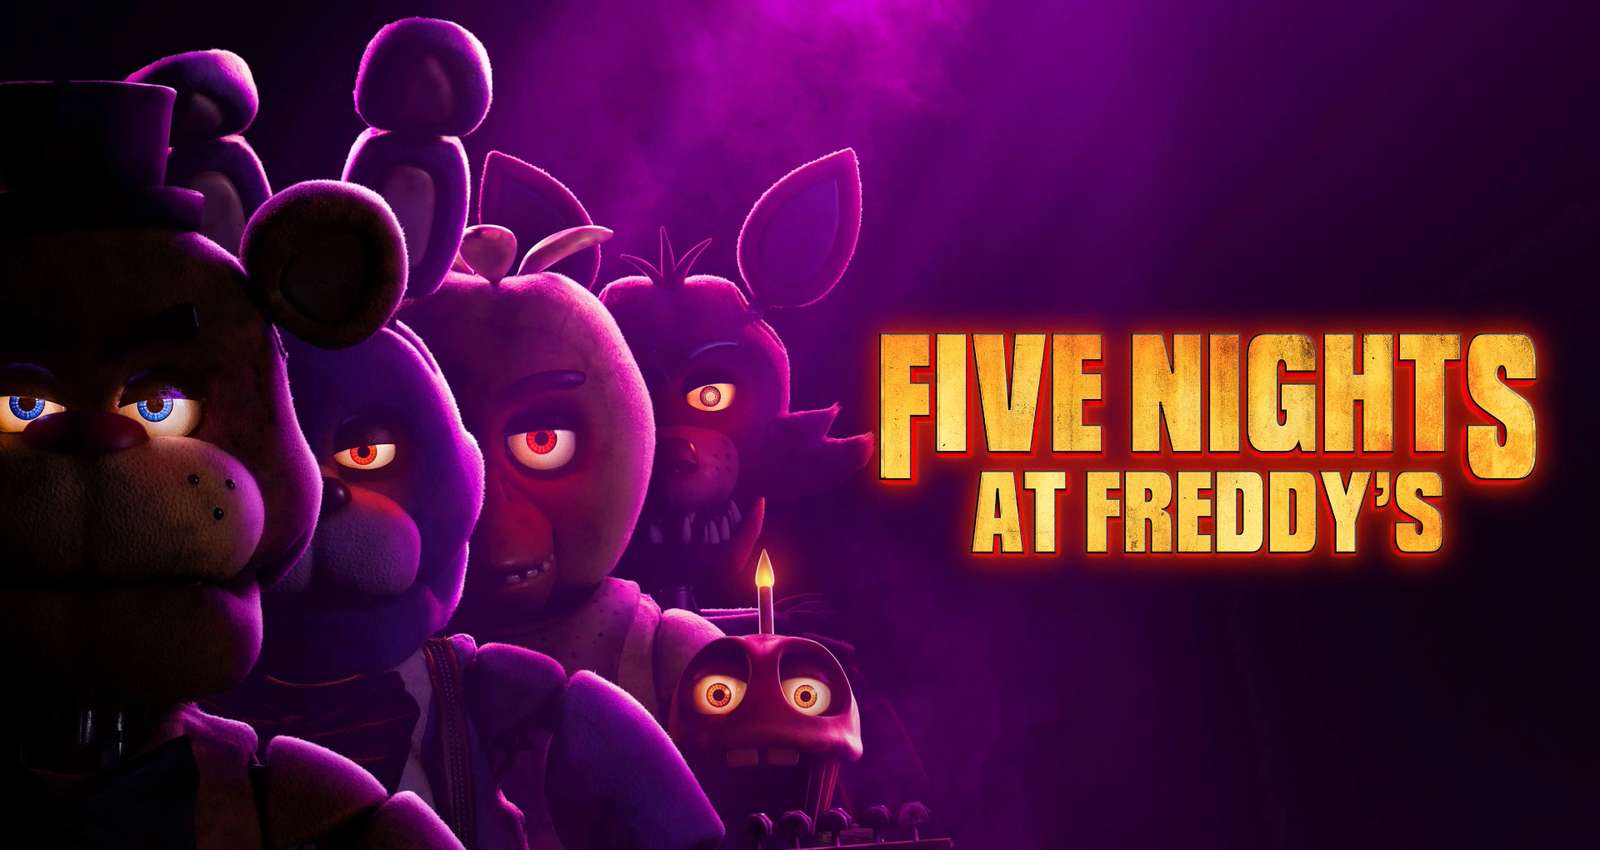 Five Nights At Freddys Movie Puzzle puzzle online from photo